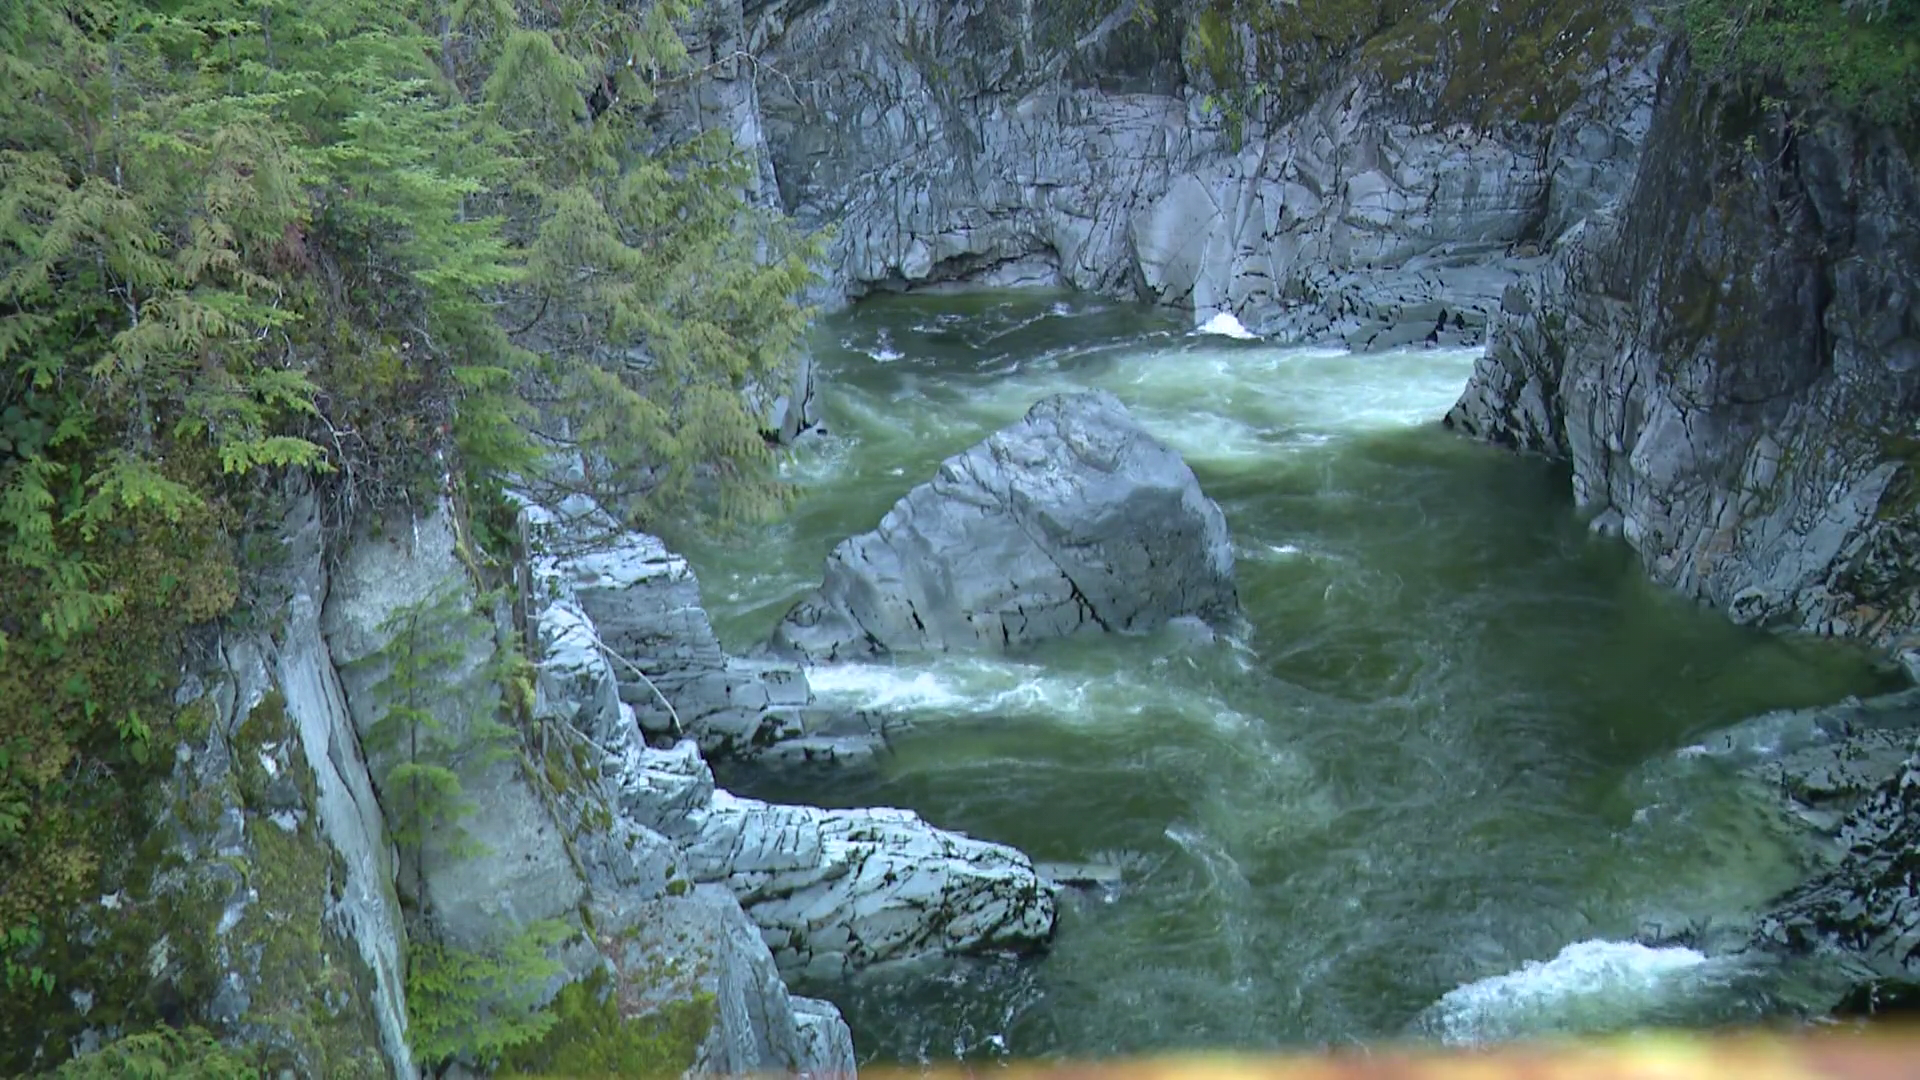 Search suspended after woman swept away in Mamquam River near Squamish, B.C.